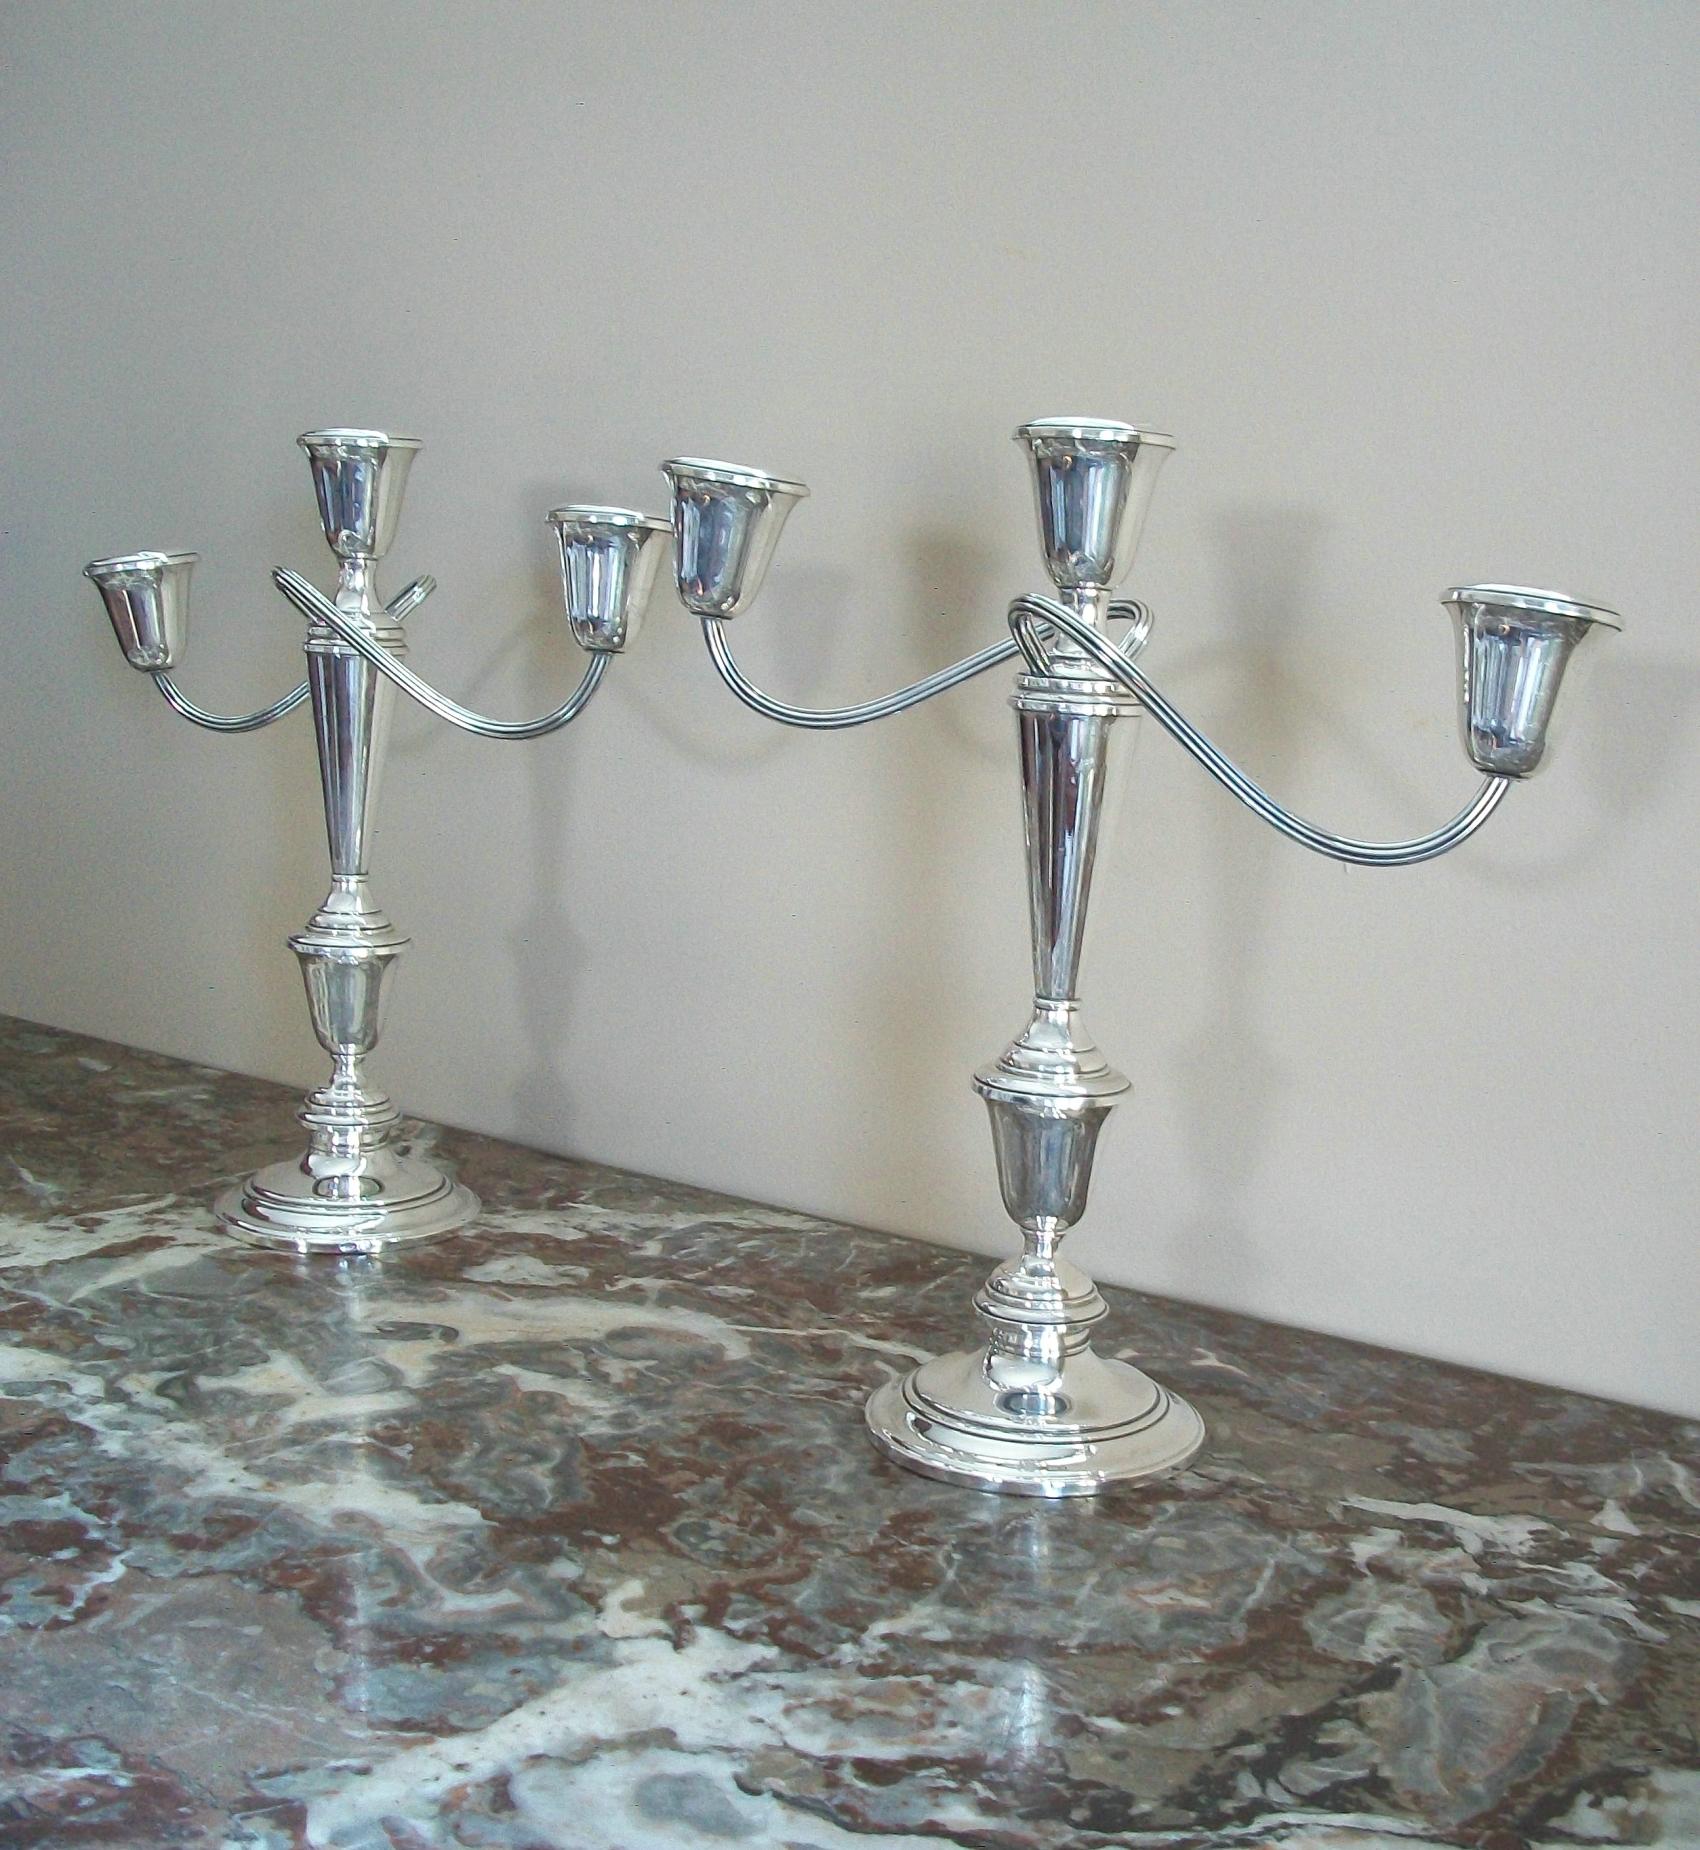 American NEWPORT - Pair of Sterling Silver Candelabra - Weighted - U.S.A. - 20th Century For Sale